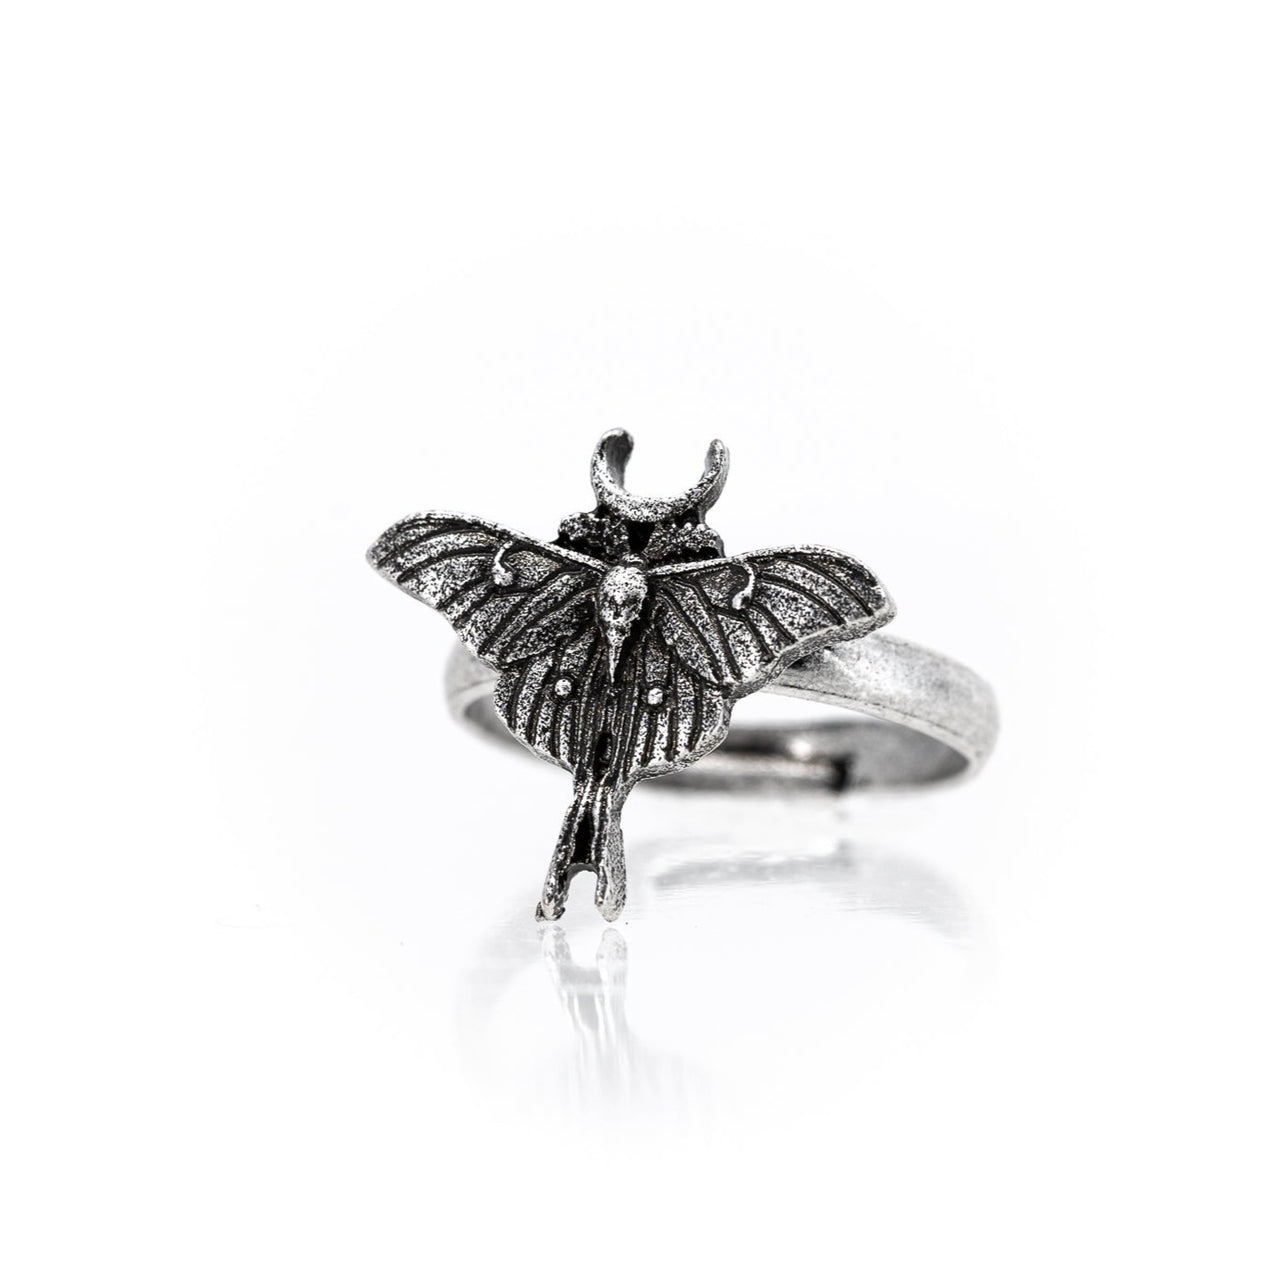 Luna Moth - Celestial Witchy Ring - Gothic Ring - Black Feather Design